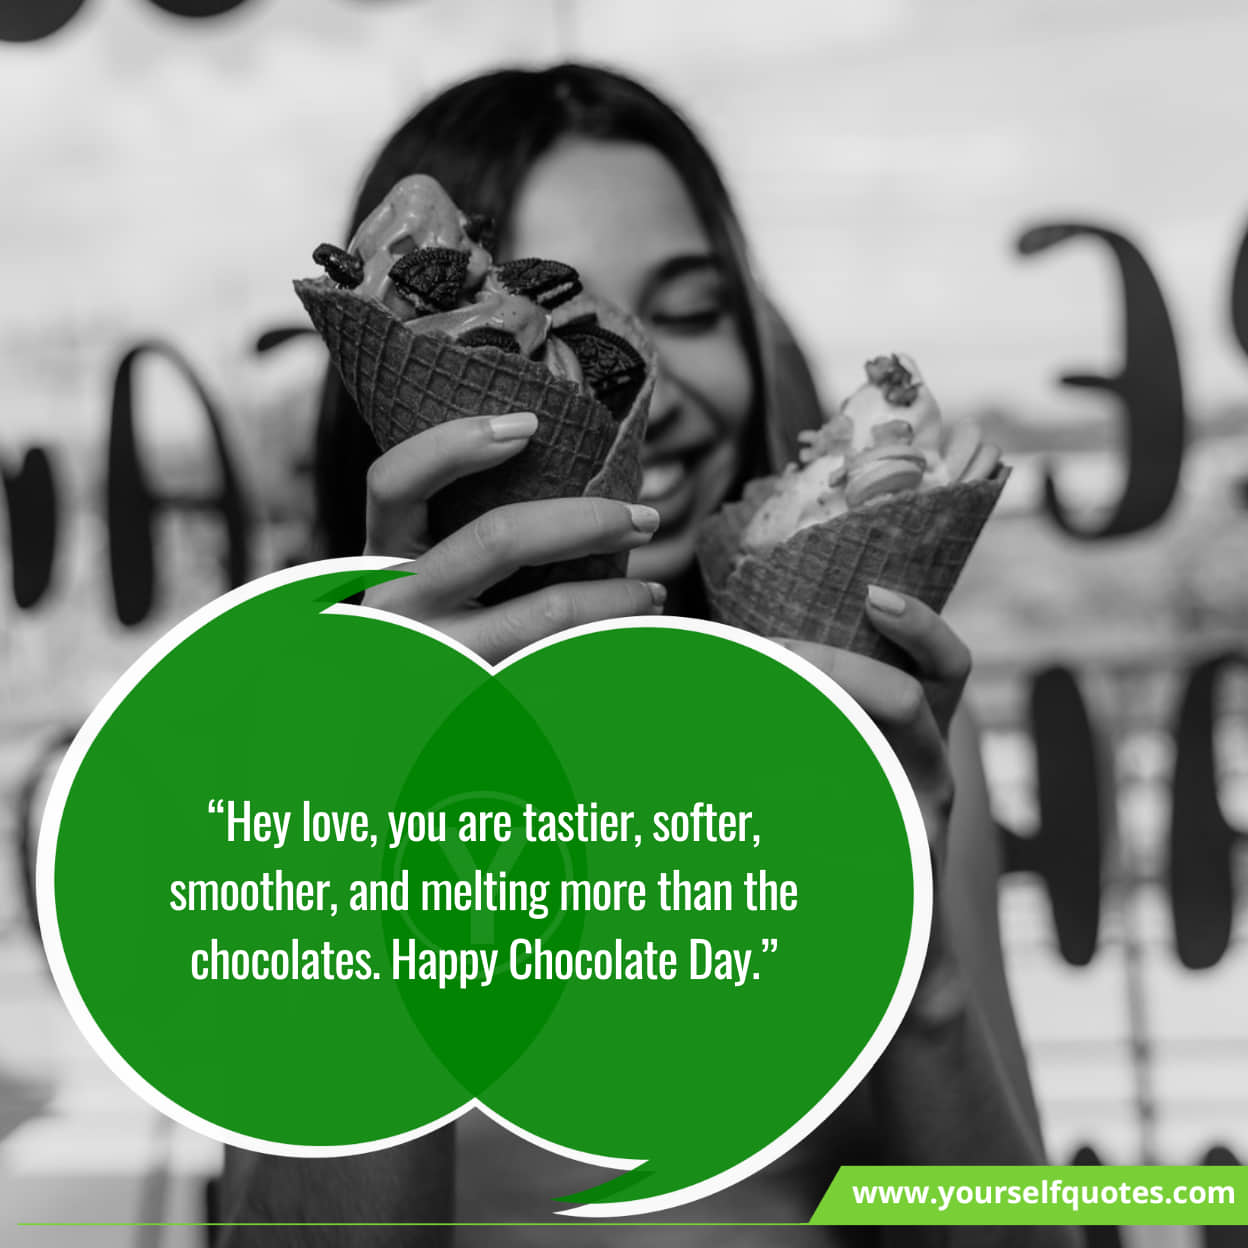 Quotes to savor the joy of chocolate on this special day